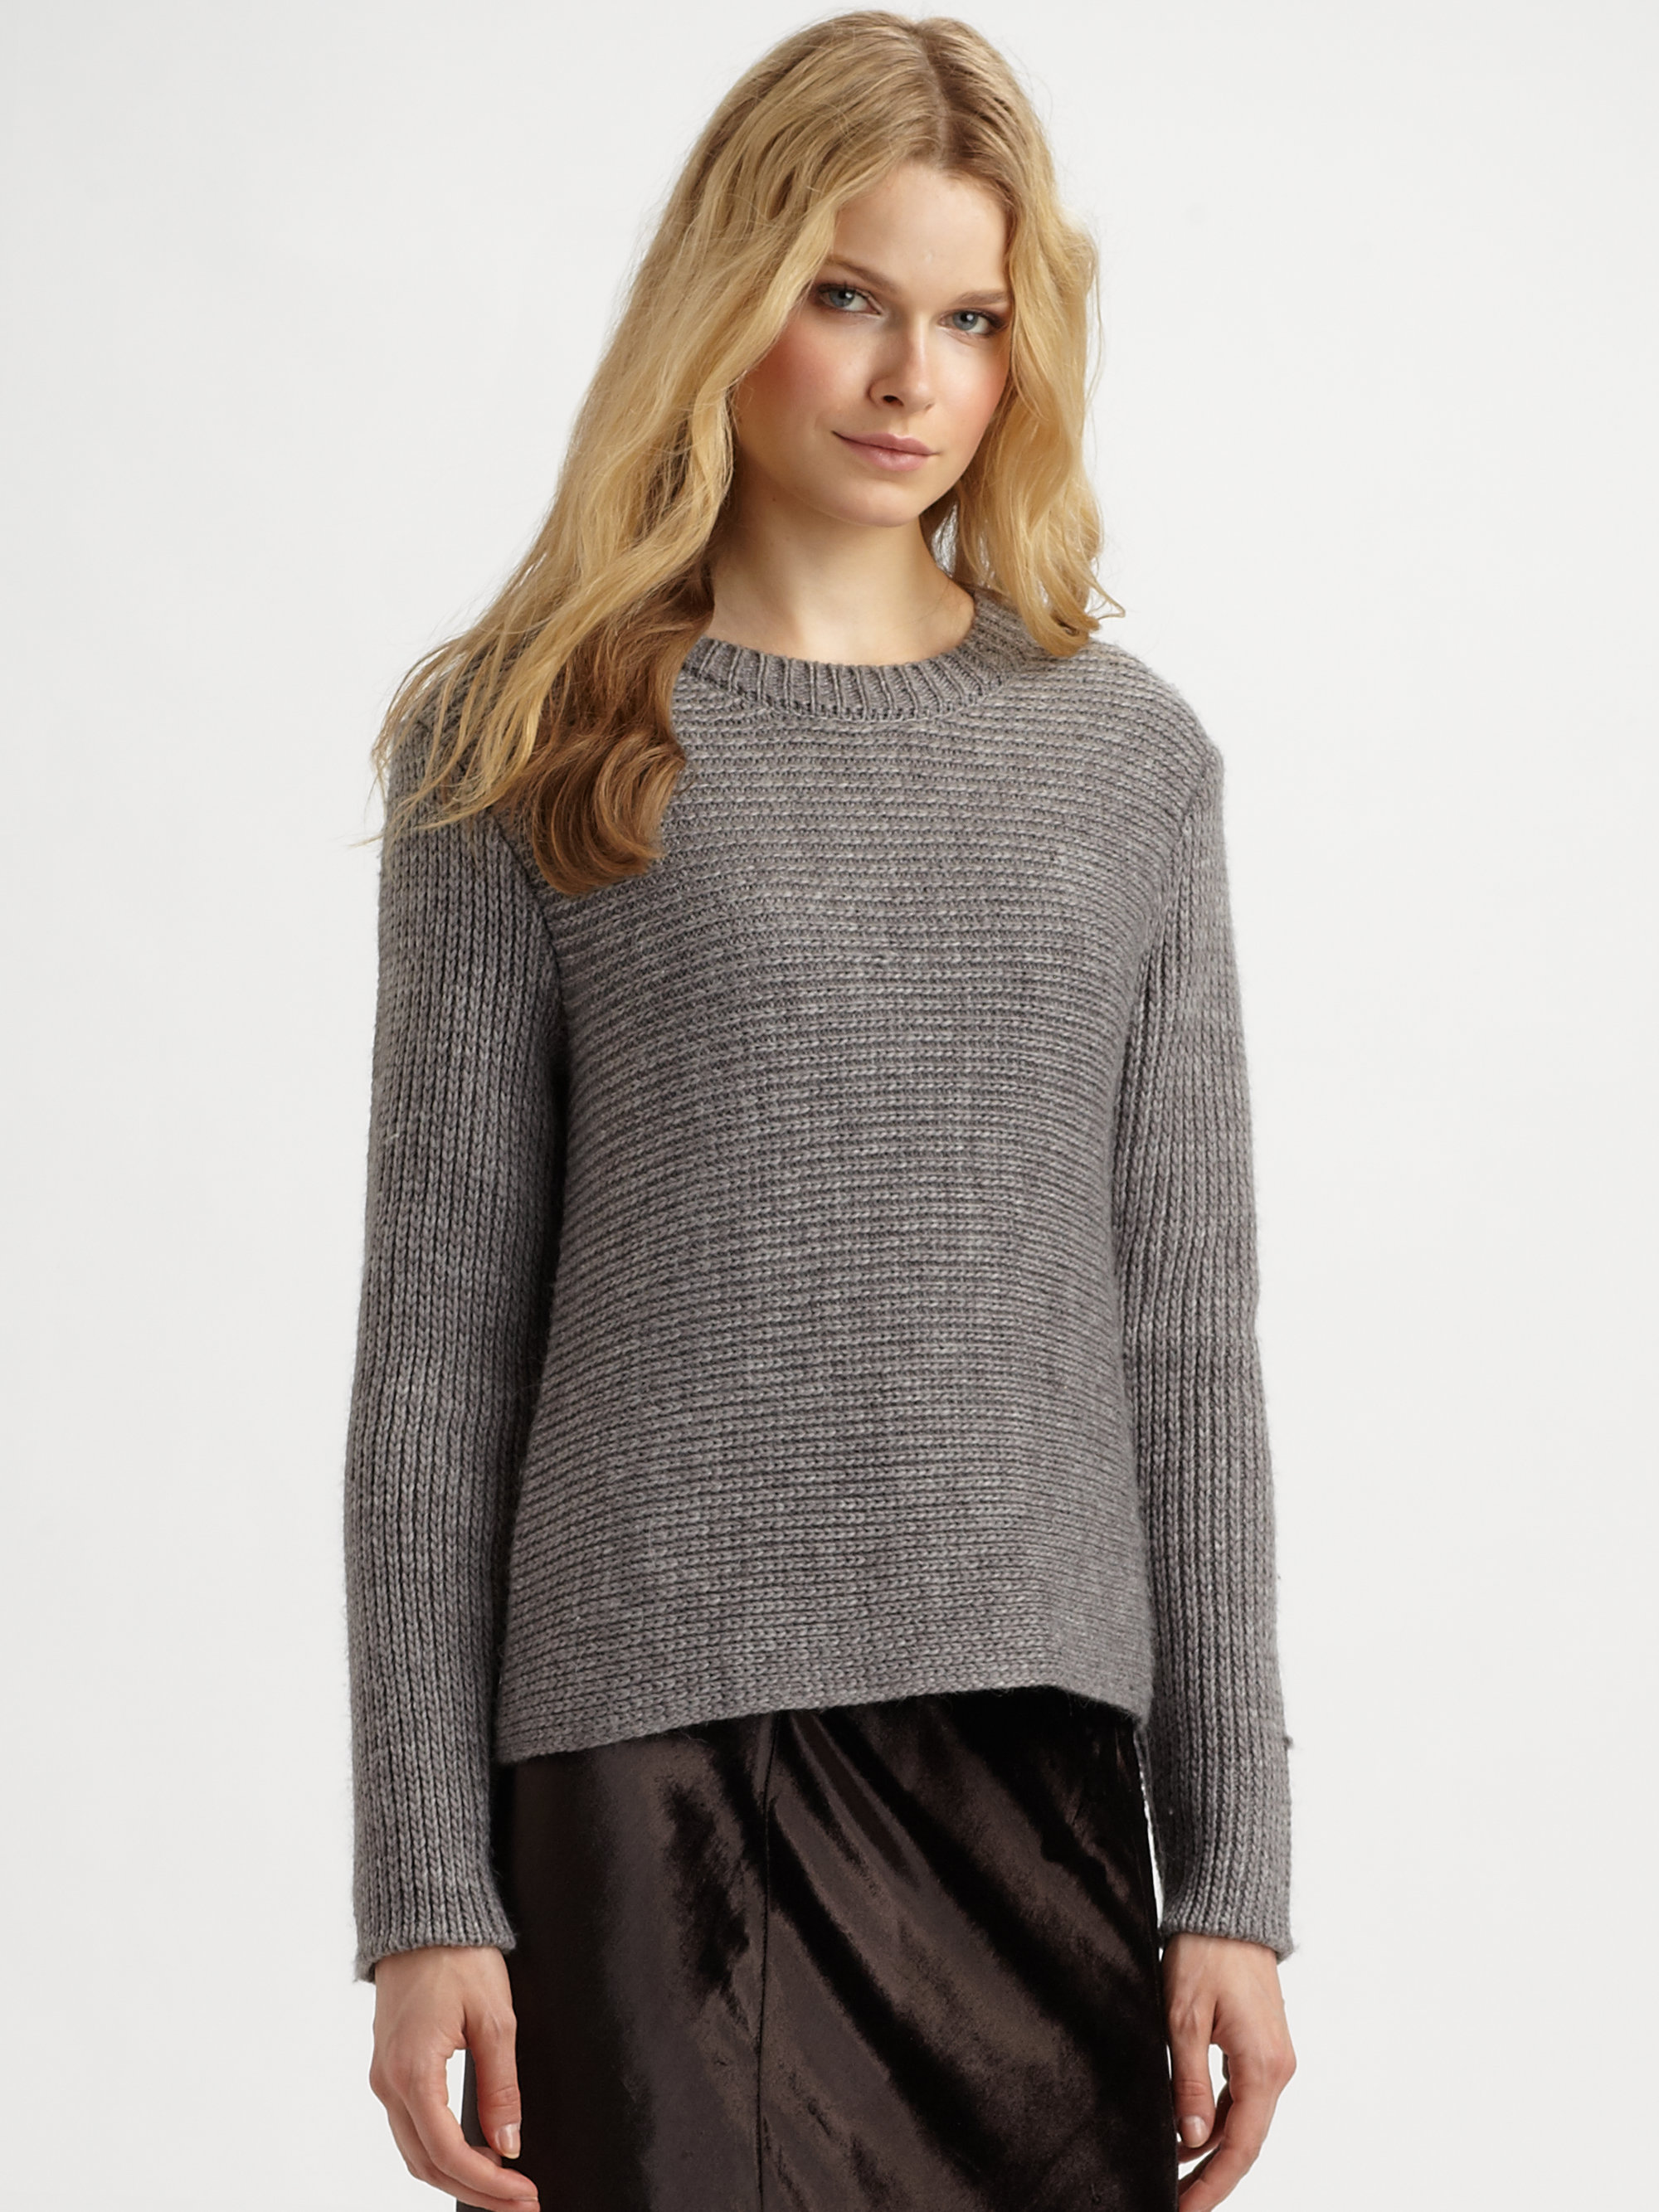 Lyst - T By Alexander Wang Half Milano Pullover Sweater in Gray